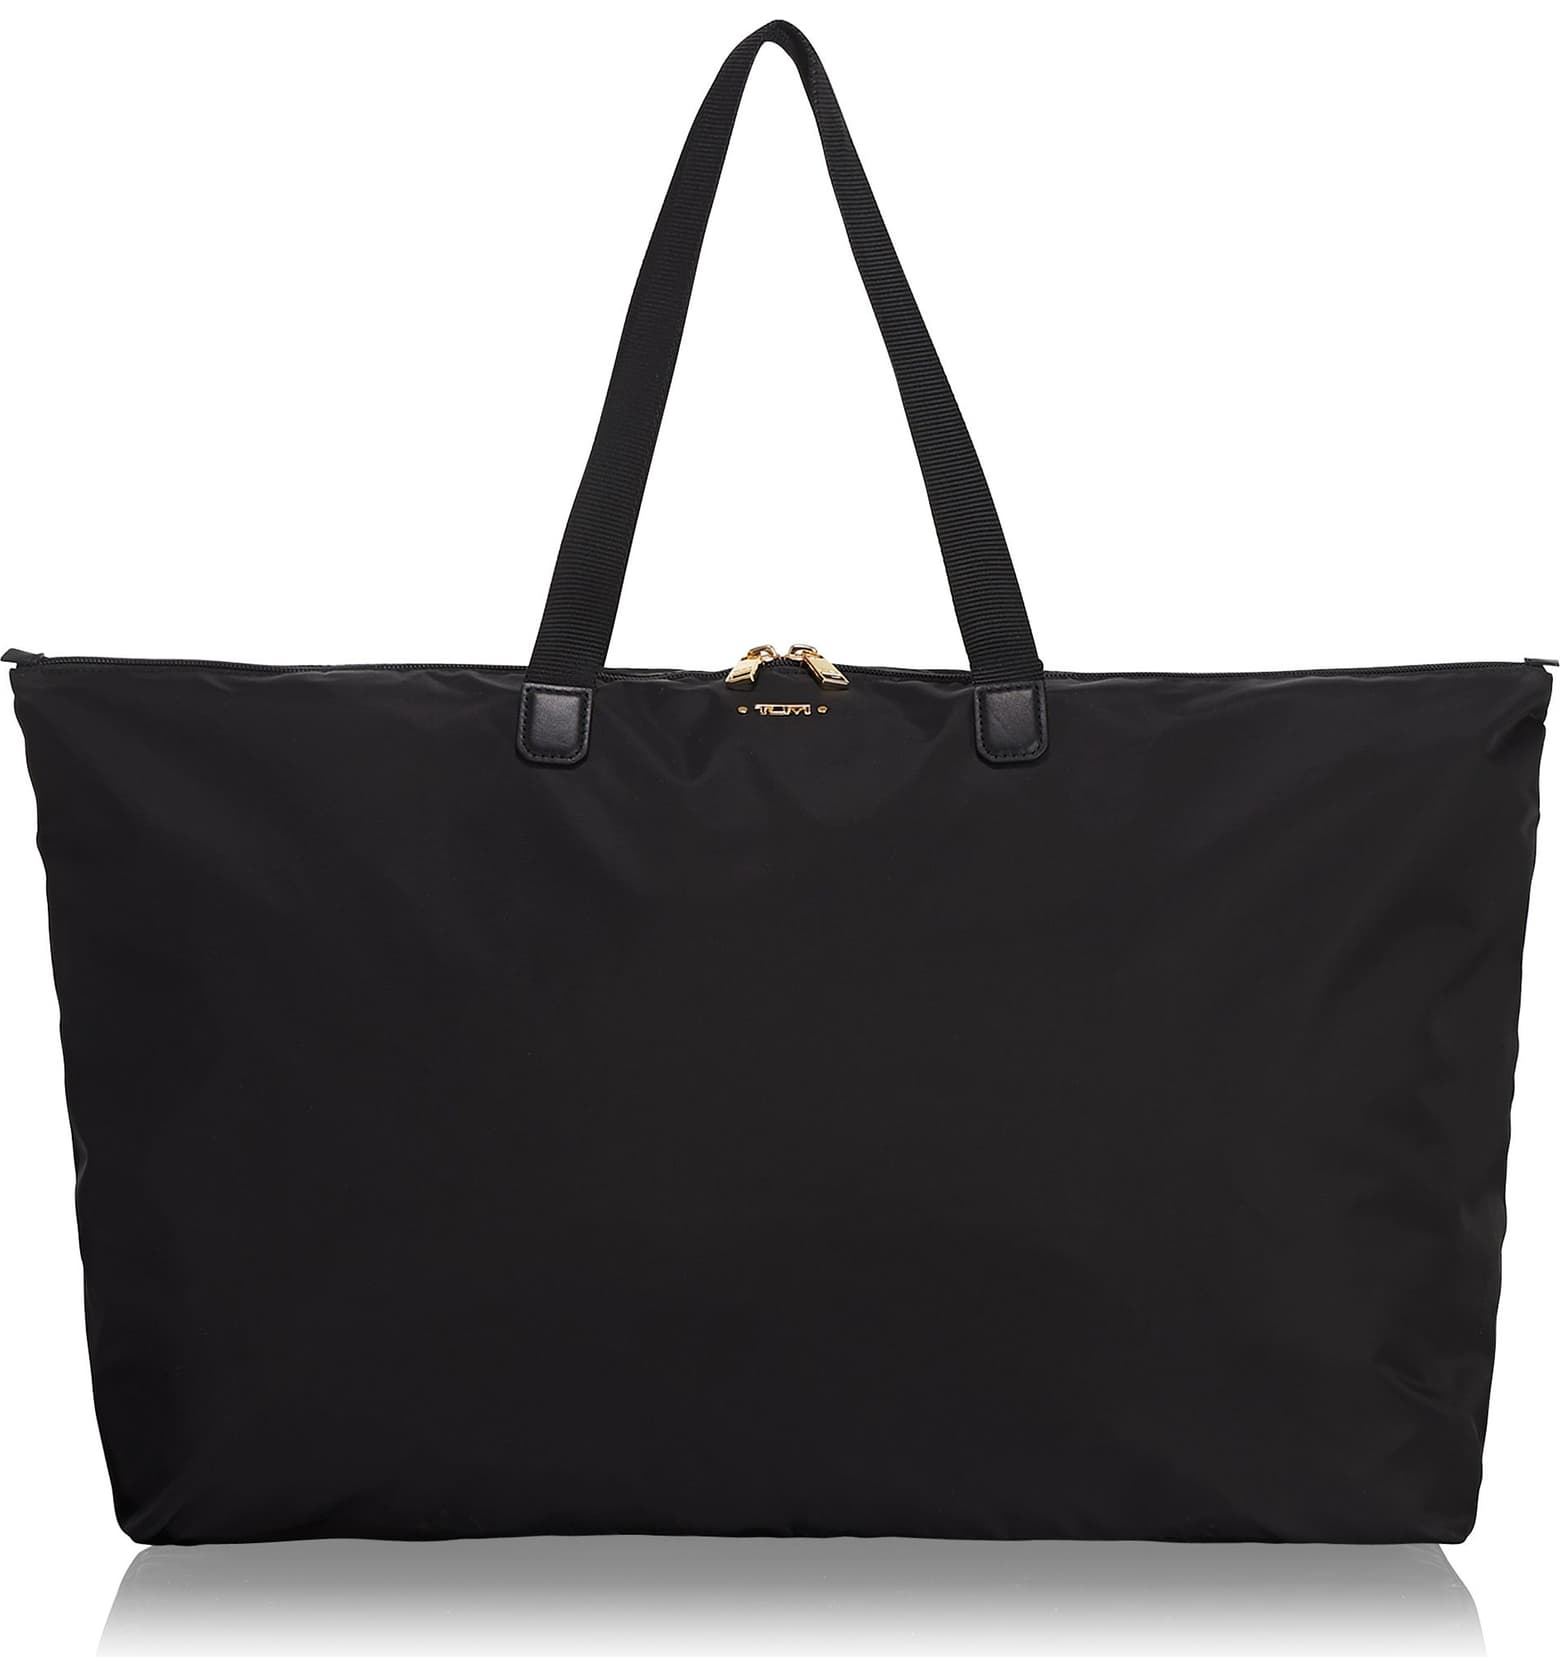 Black Just In Case Tote, $100 at Nordstrom